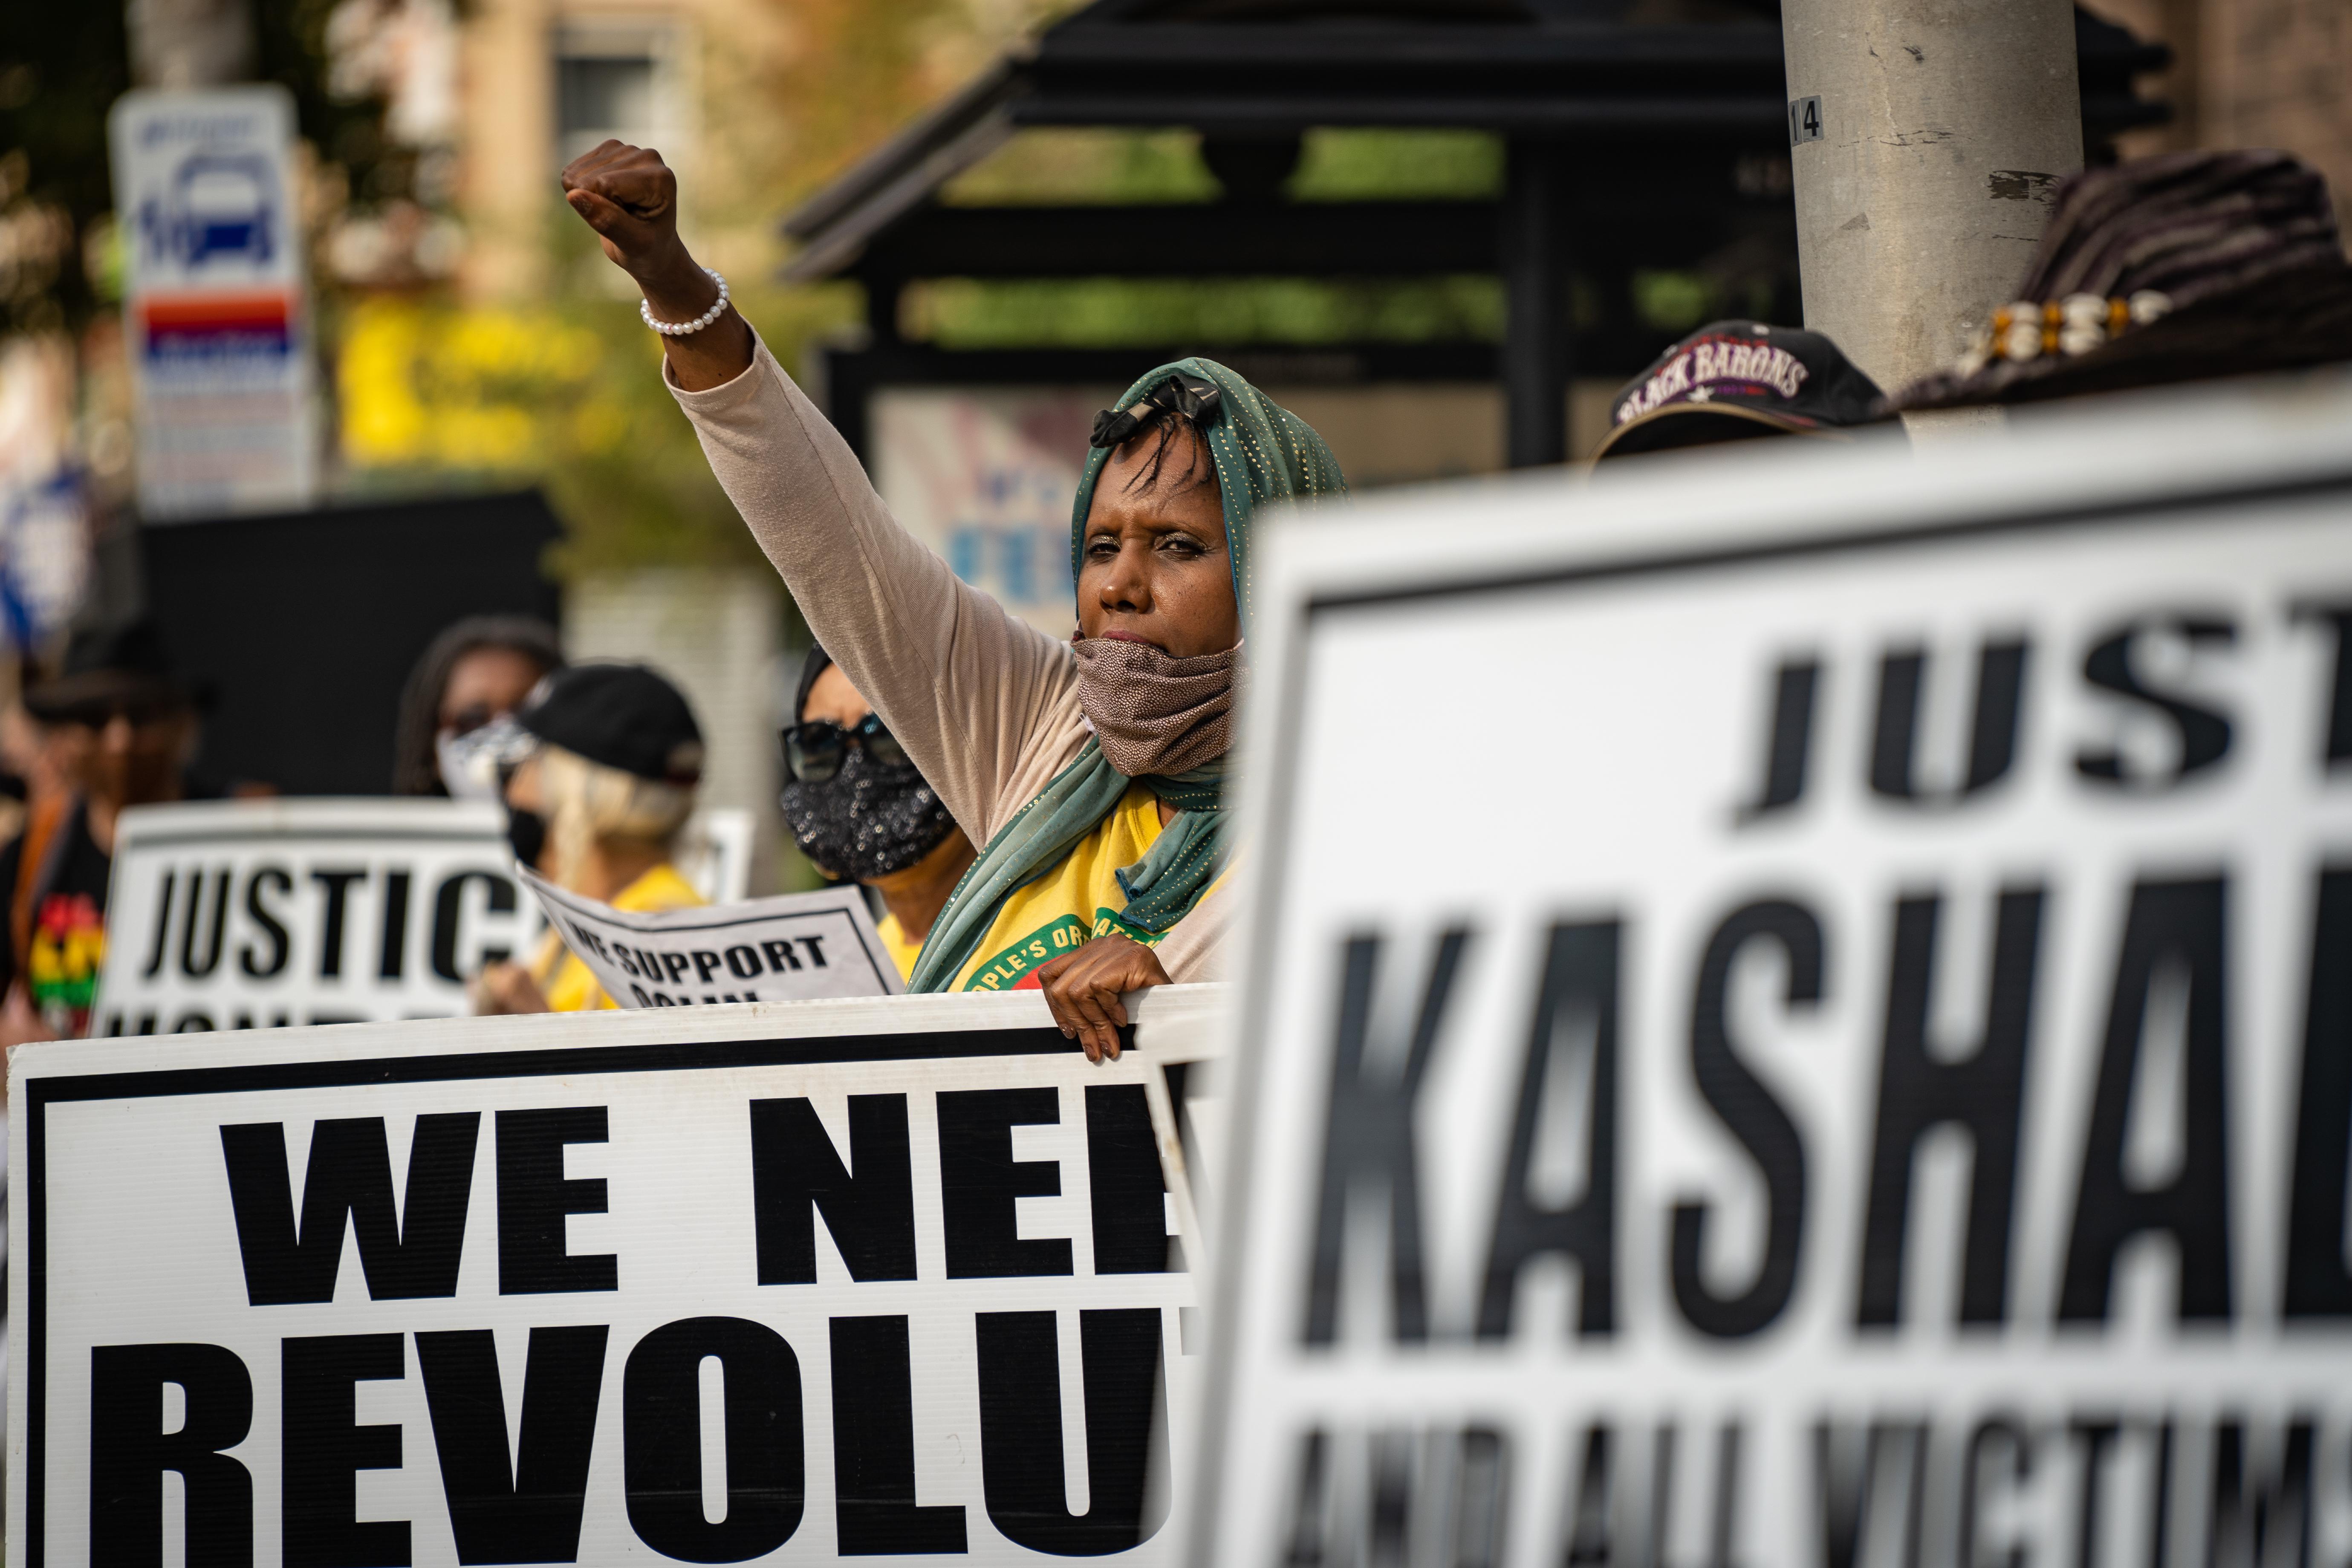 A woman with a sign raises her fist as a crowd gathers at a People's Organization for Progress rally to protest police brutality on August 17, 2020 in Newark, NJ.